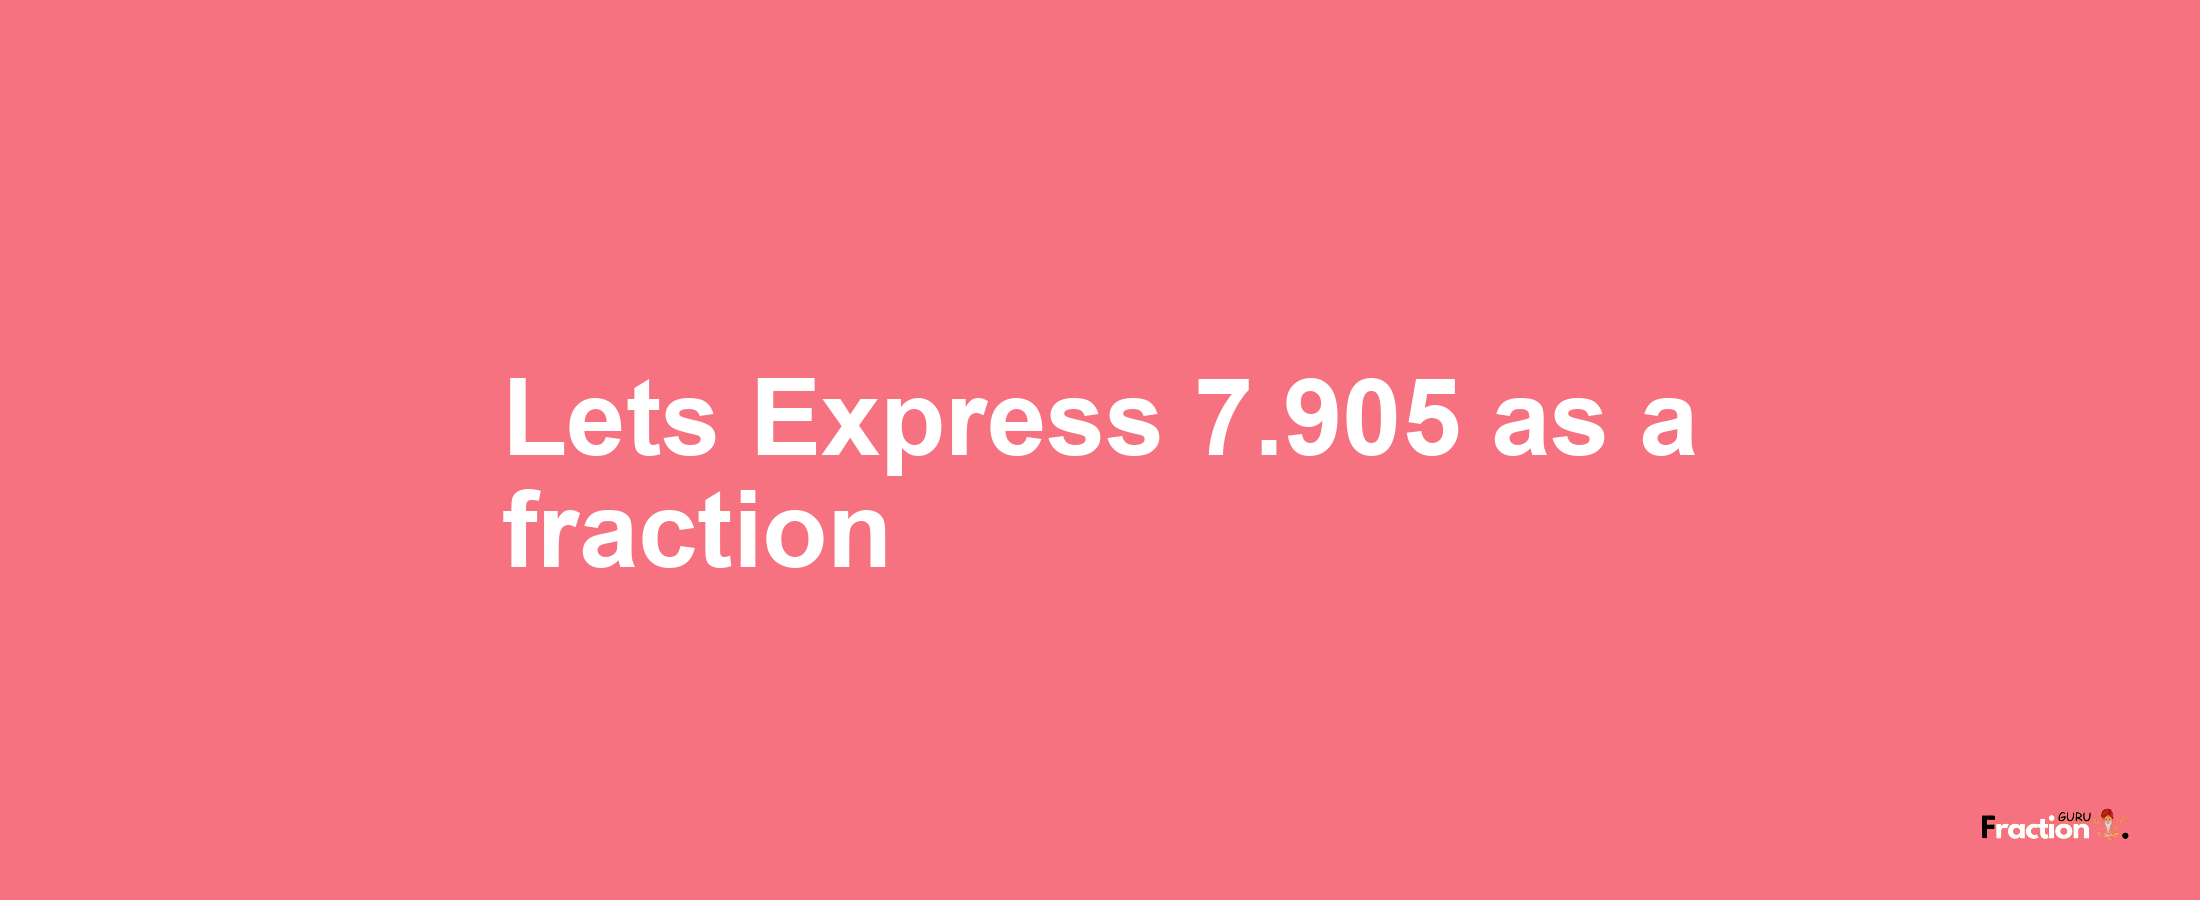 Lets Express 7.905 as afraction